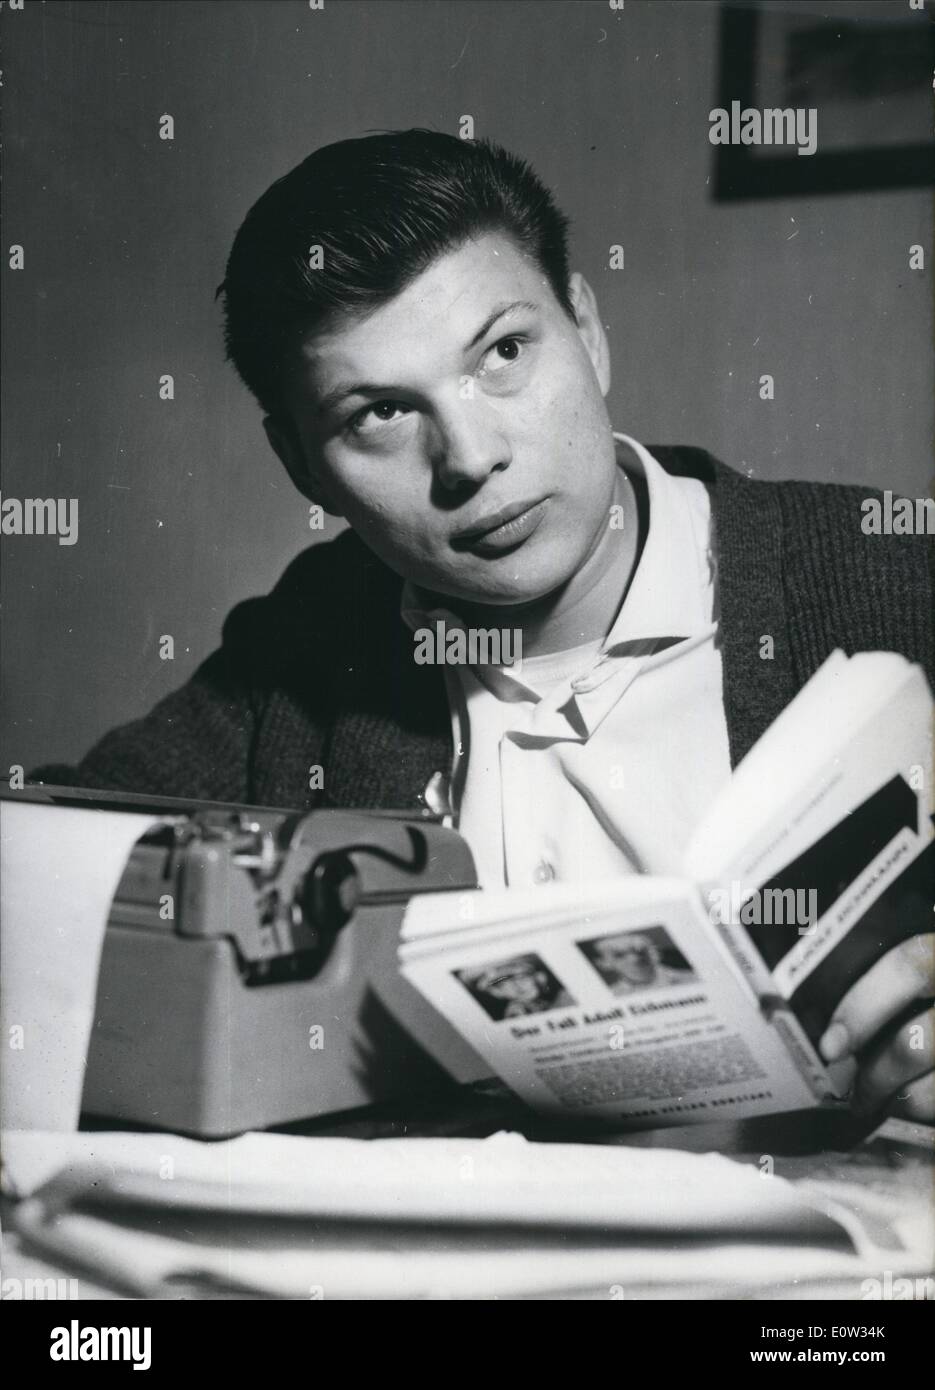 Mar. 03, 1961 - Youngest Journalist at the Eichmann trial: The youngest of the 500 journalists who are permitted to attend the Eichmann trial (starting on April 11th in Jerusalem) is 21 year old Gerhard Wolfrum of the little village Schauenstein near Hof West Germany. He had written to the Israelian Prime Minister Ben Gurion that he wanted to be present at the trial, looking at it with the eyes of the young generation who did not even go to school when Eichmann ''worked' Stock Photo